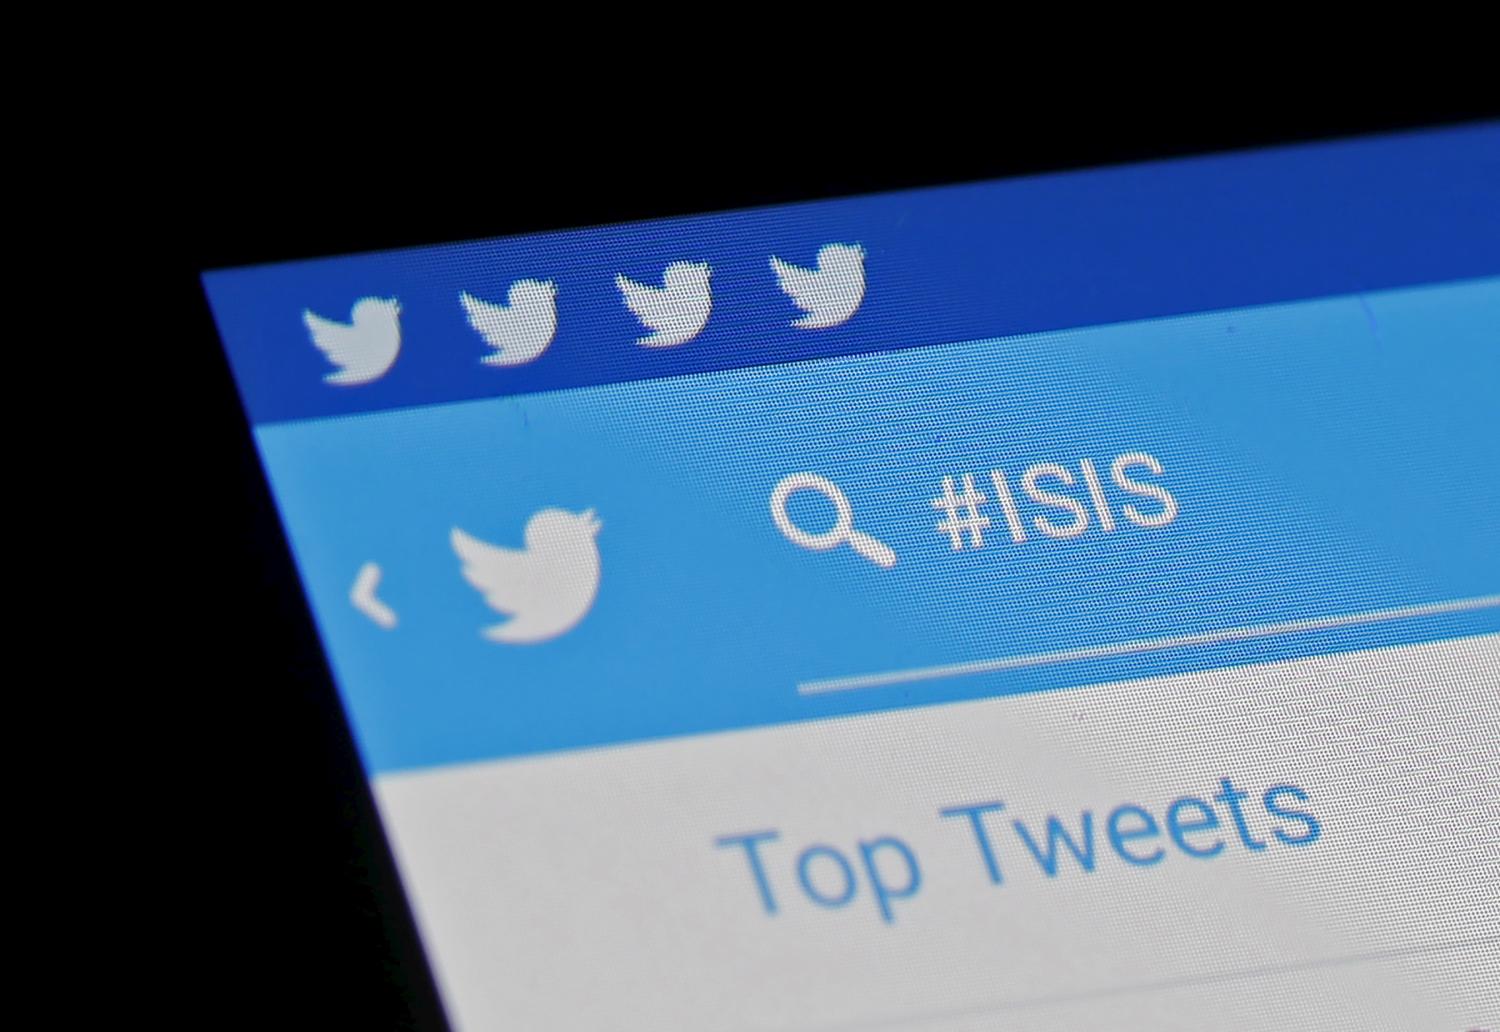 The Islamic State hashtag (#ISIS) is seen typed into the Twitter application on a smartphone in this picture illustration taken in Zenica, Bosnia and Herzegovina, February 6, 2016. Twitter Inc has shut down more than 125,000 terrorism-related accounts since the middle of 2015, most of them linked to the Islamic State group, the company said in a blog post on Friday. REUTERS/Dado Ruvic - RTX25PB6